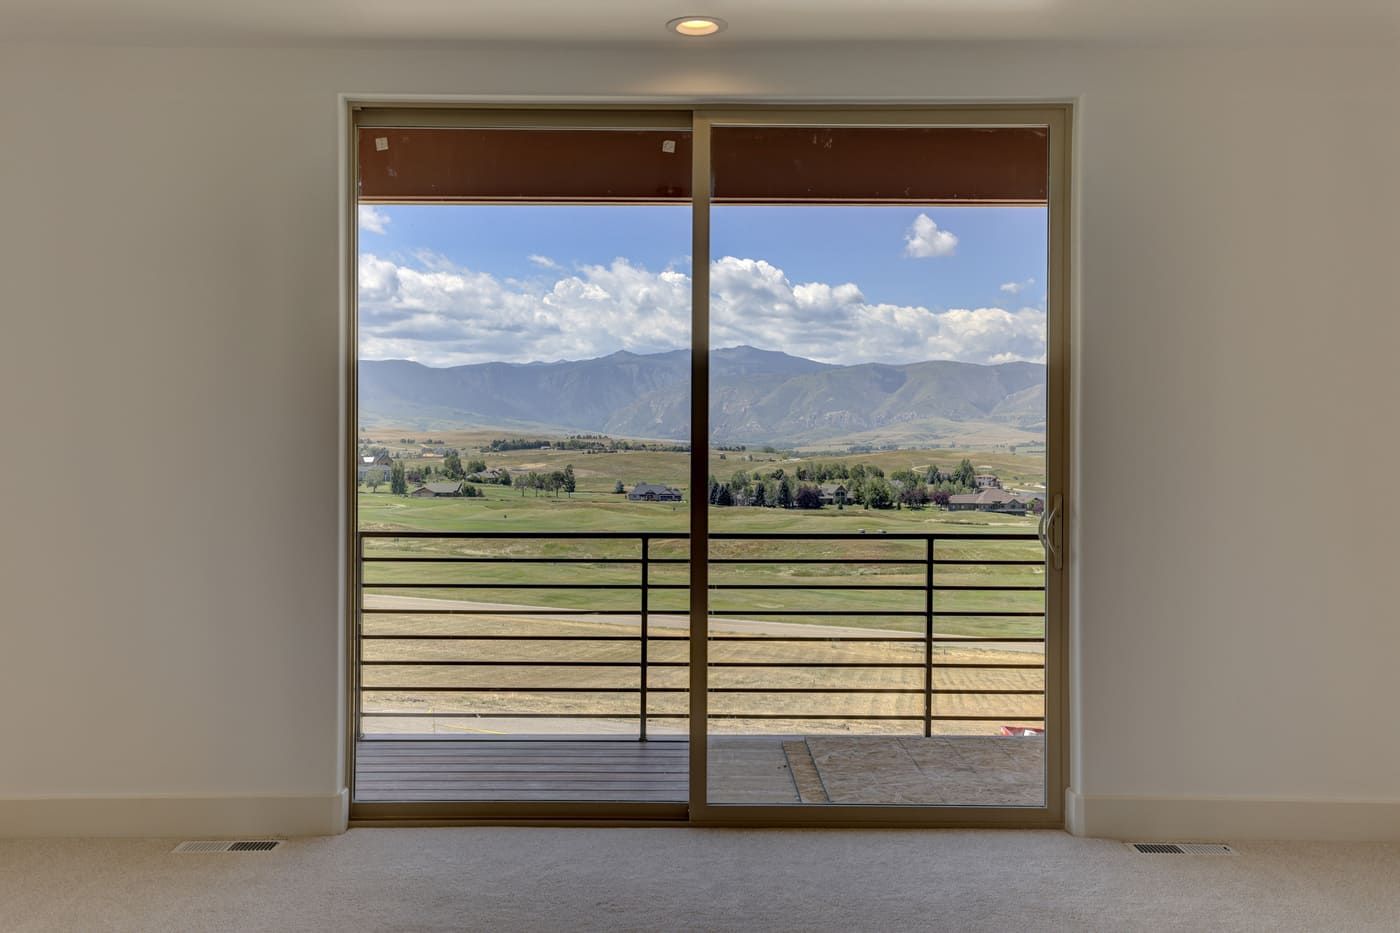 View of sliding glass door of Wyoming custom home with view of mountain landscape